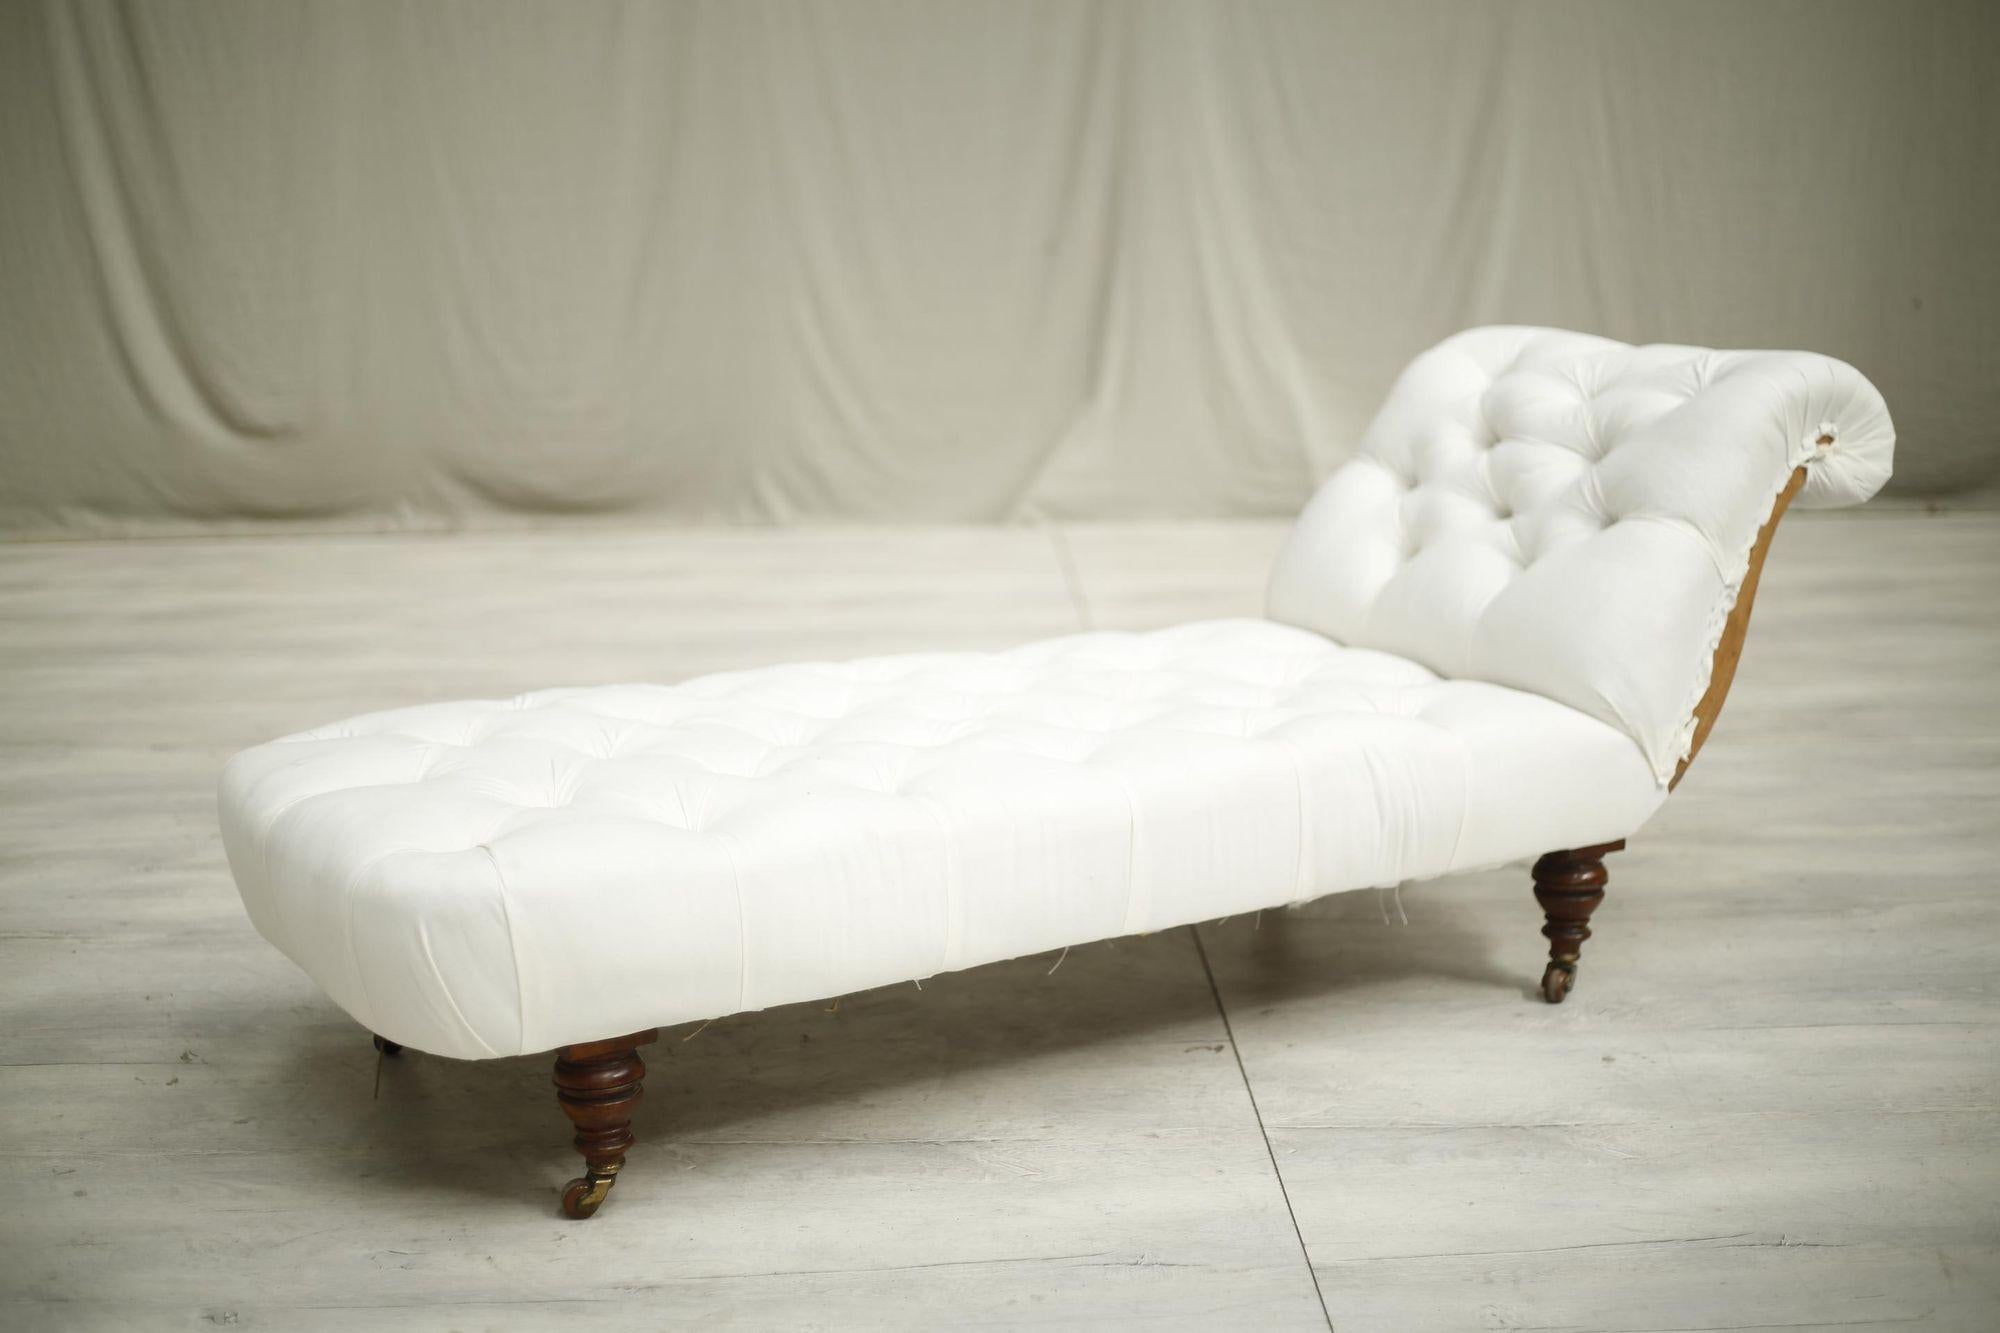 This is a very well made English country house chaise longue. The deep buttoned detail and simple scroll back shape make this extremely elegant. It will work well in a number of interiors as the design is ageless and the fabric choice will dictate